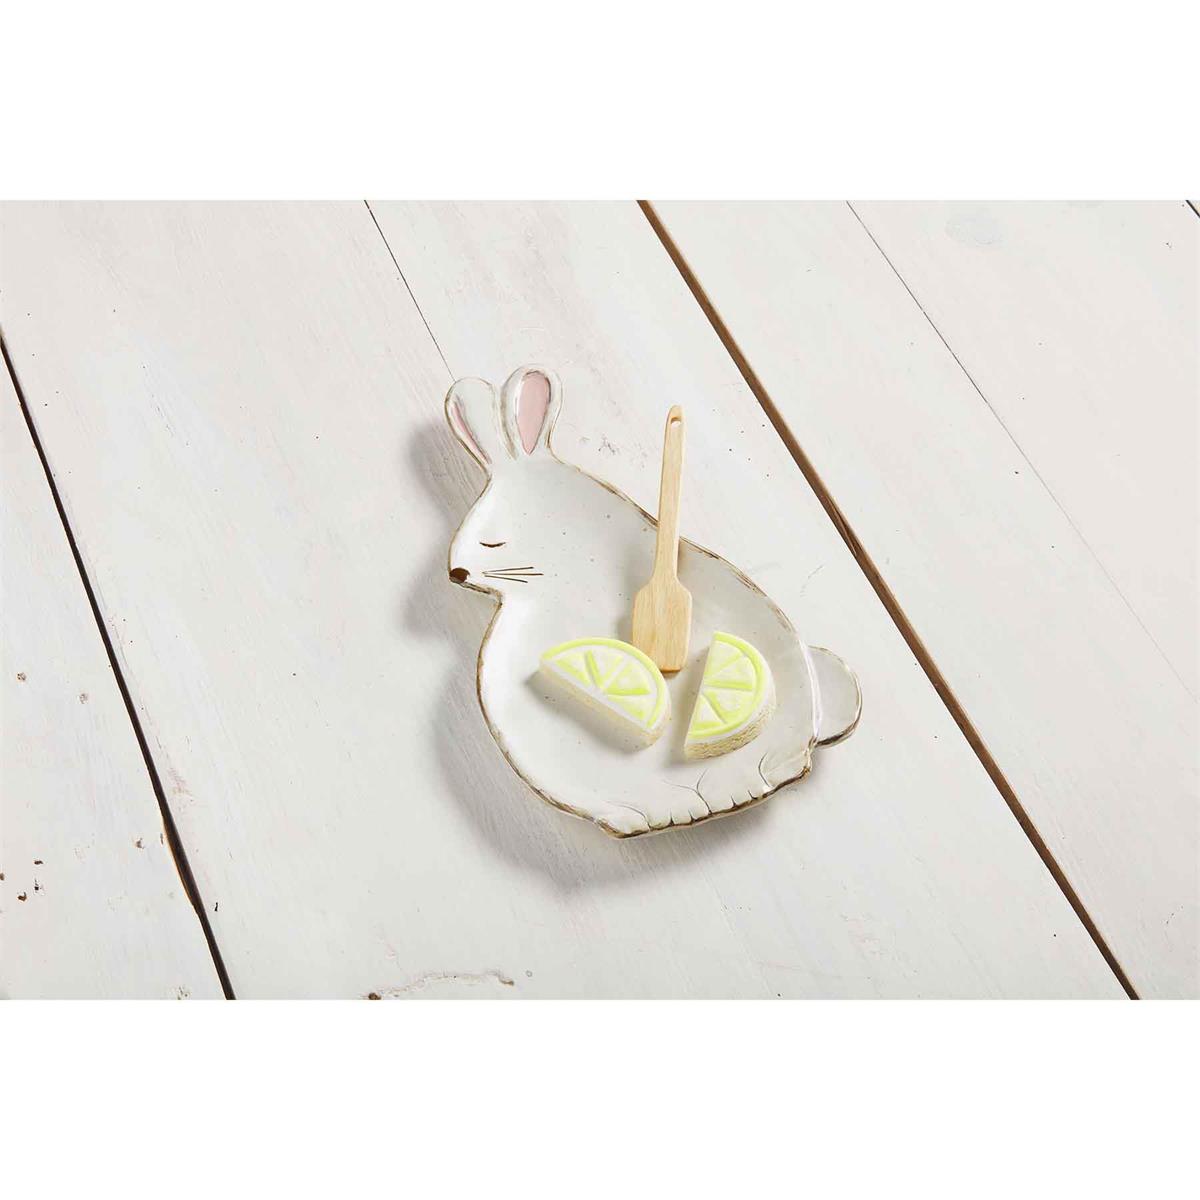 Mud Pie MEA6 Easter Kitchen Small Bunny Cutting Serving Board 2pc Set 4751035 